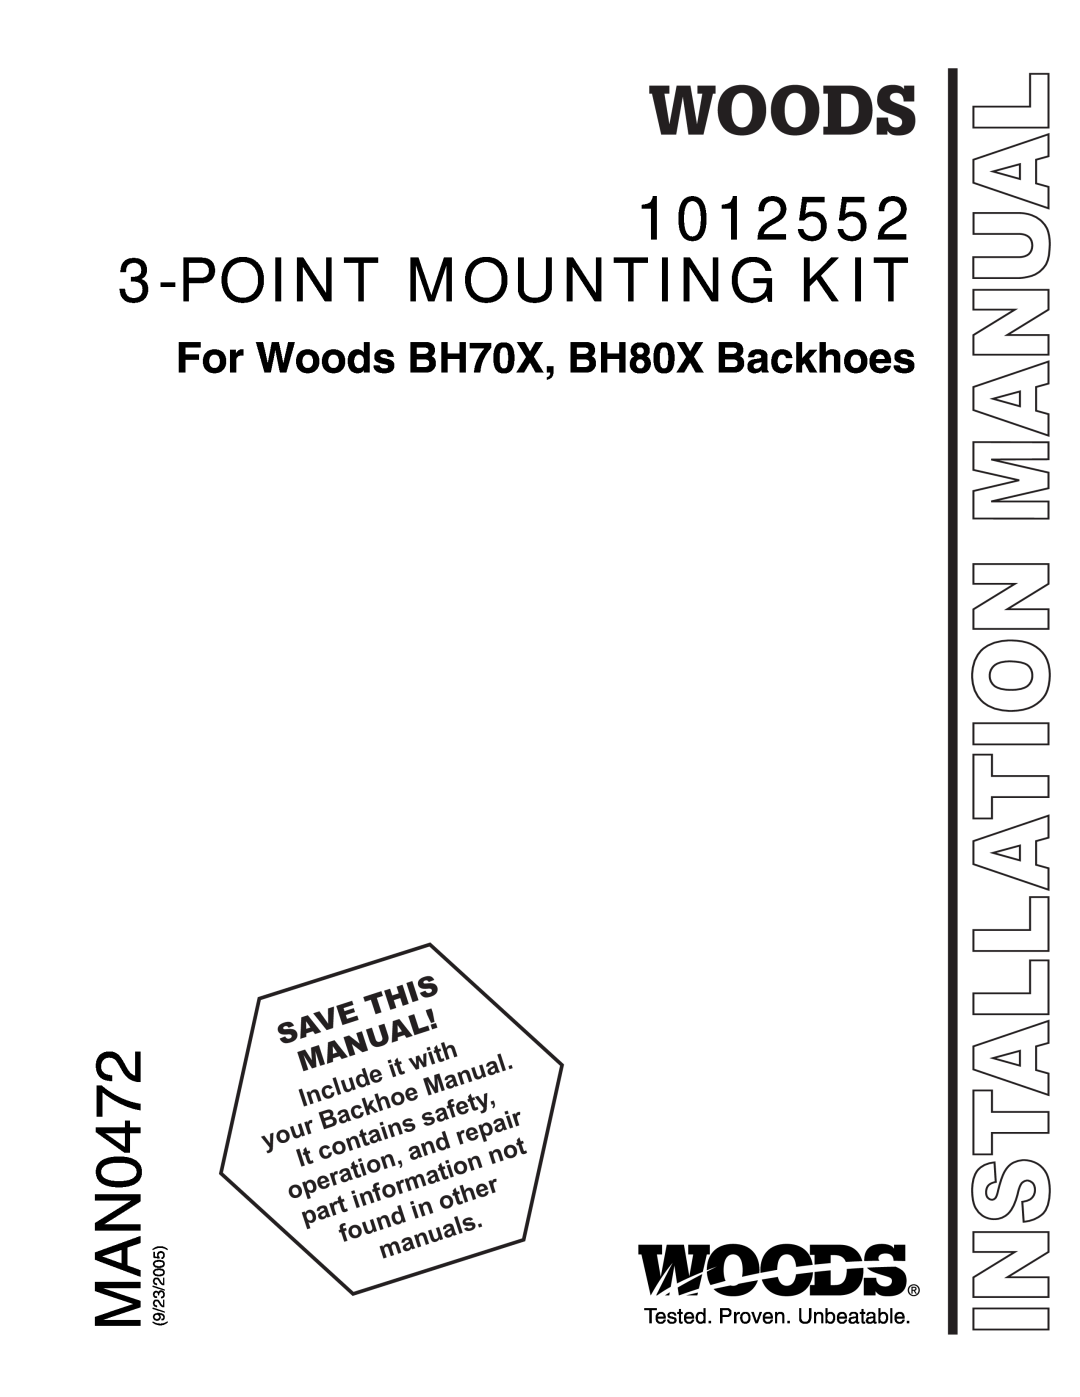 Woods Equipment manual 1012552 3-POINTMOUNTING KIT, For Woods BH70X, BH80X Backhoes, Save, This, with, Manual, your 